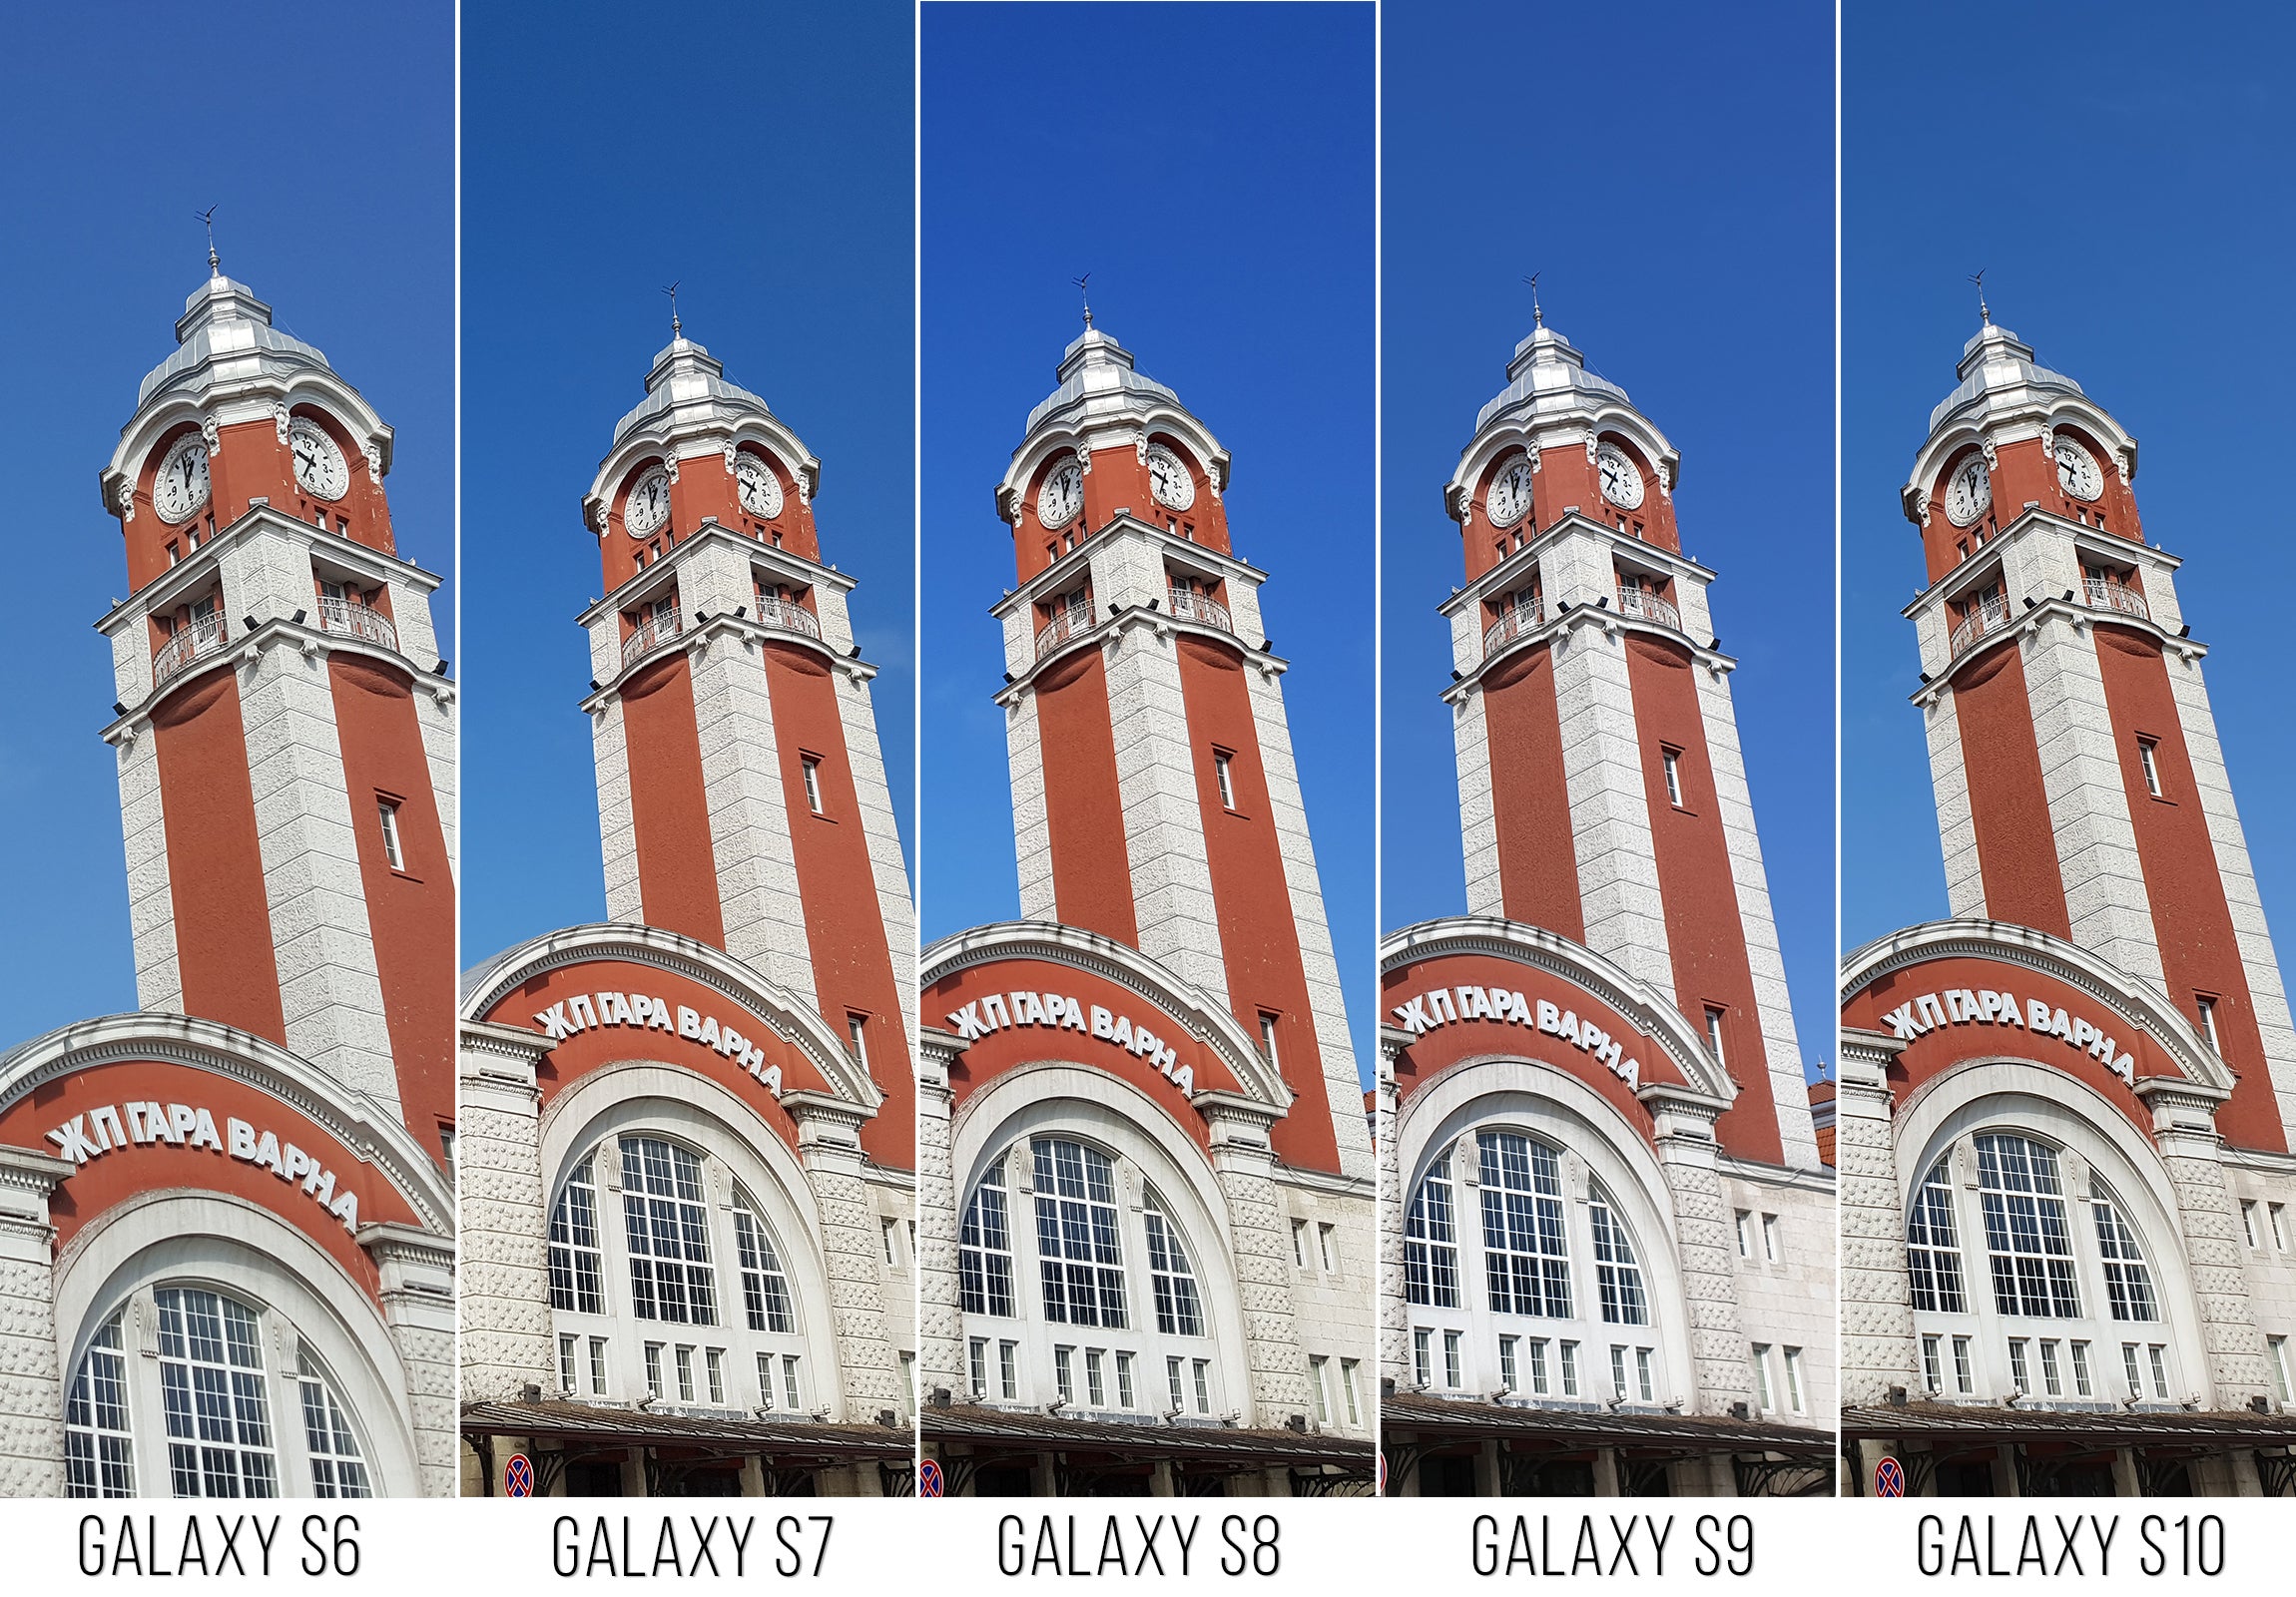 Galaxy S6 to Galaxy S10: Samsung&#039;s camera and image quality evolution through the years